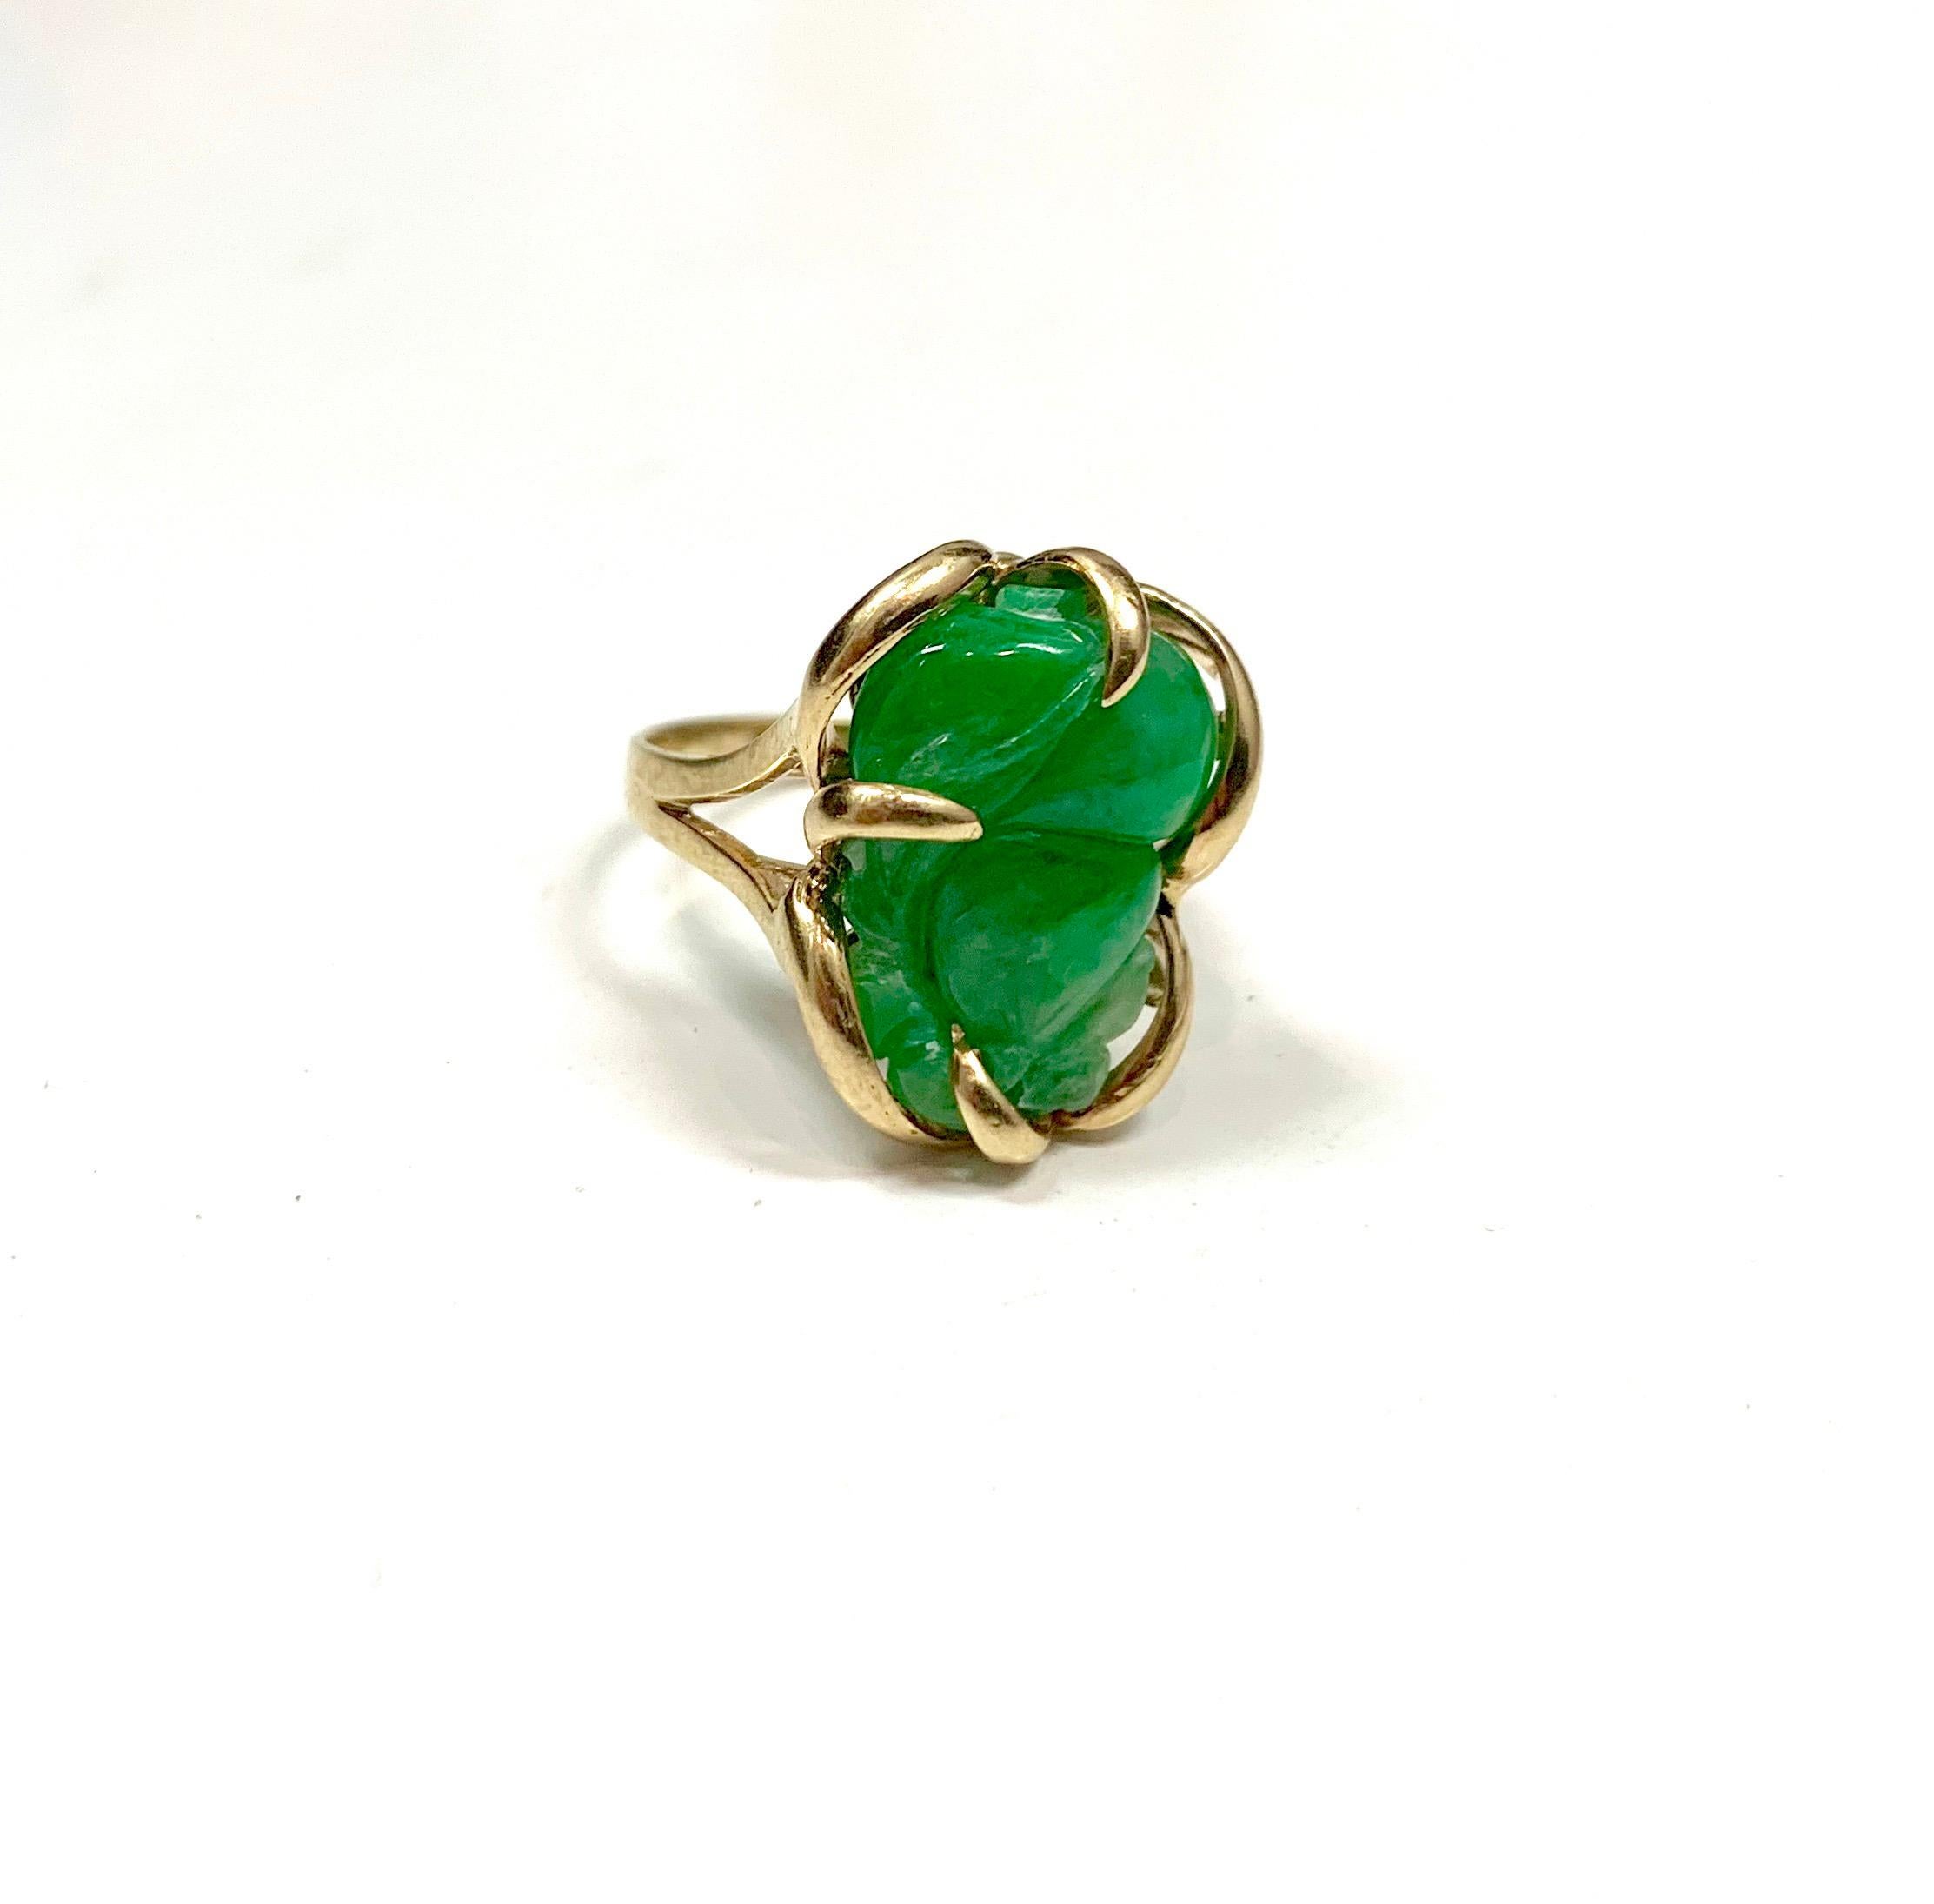 This jade ring has a center stone that measures approximately 22 x 10mm. The center stone has color zoning ranging from a rich green to a lighter green. The ring is cast from 14k yellow gold and has both 585 and 14k hallmarks inside the ring. The